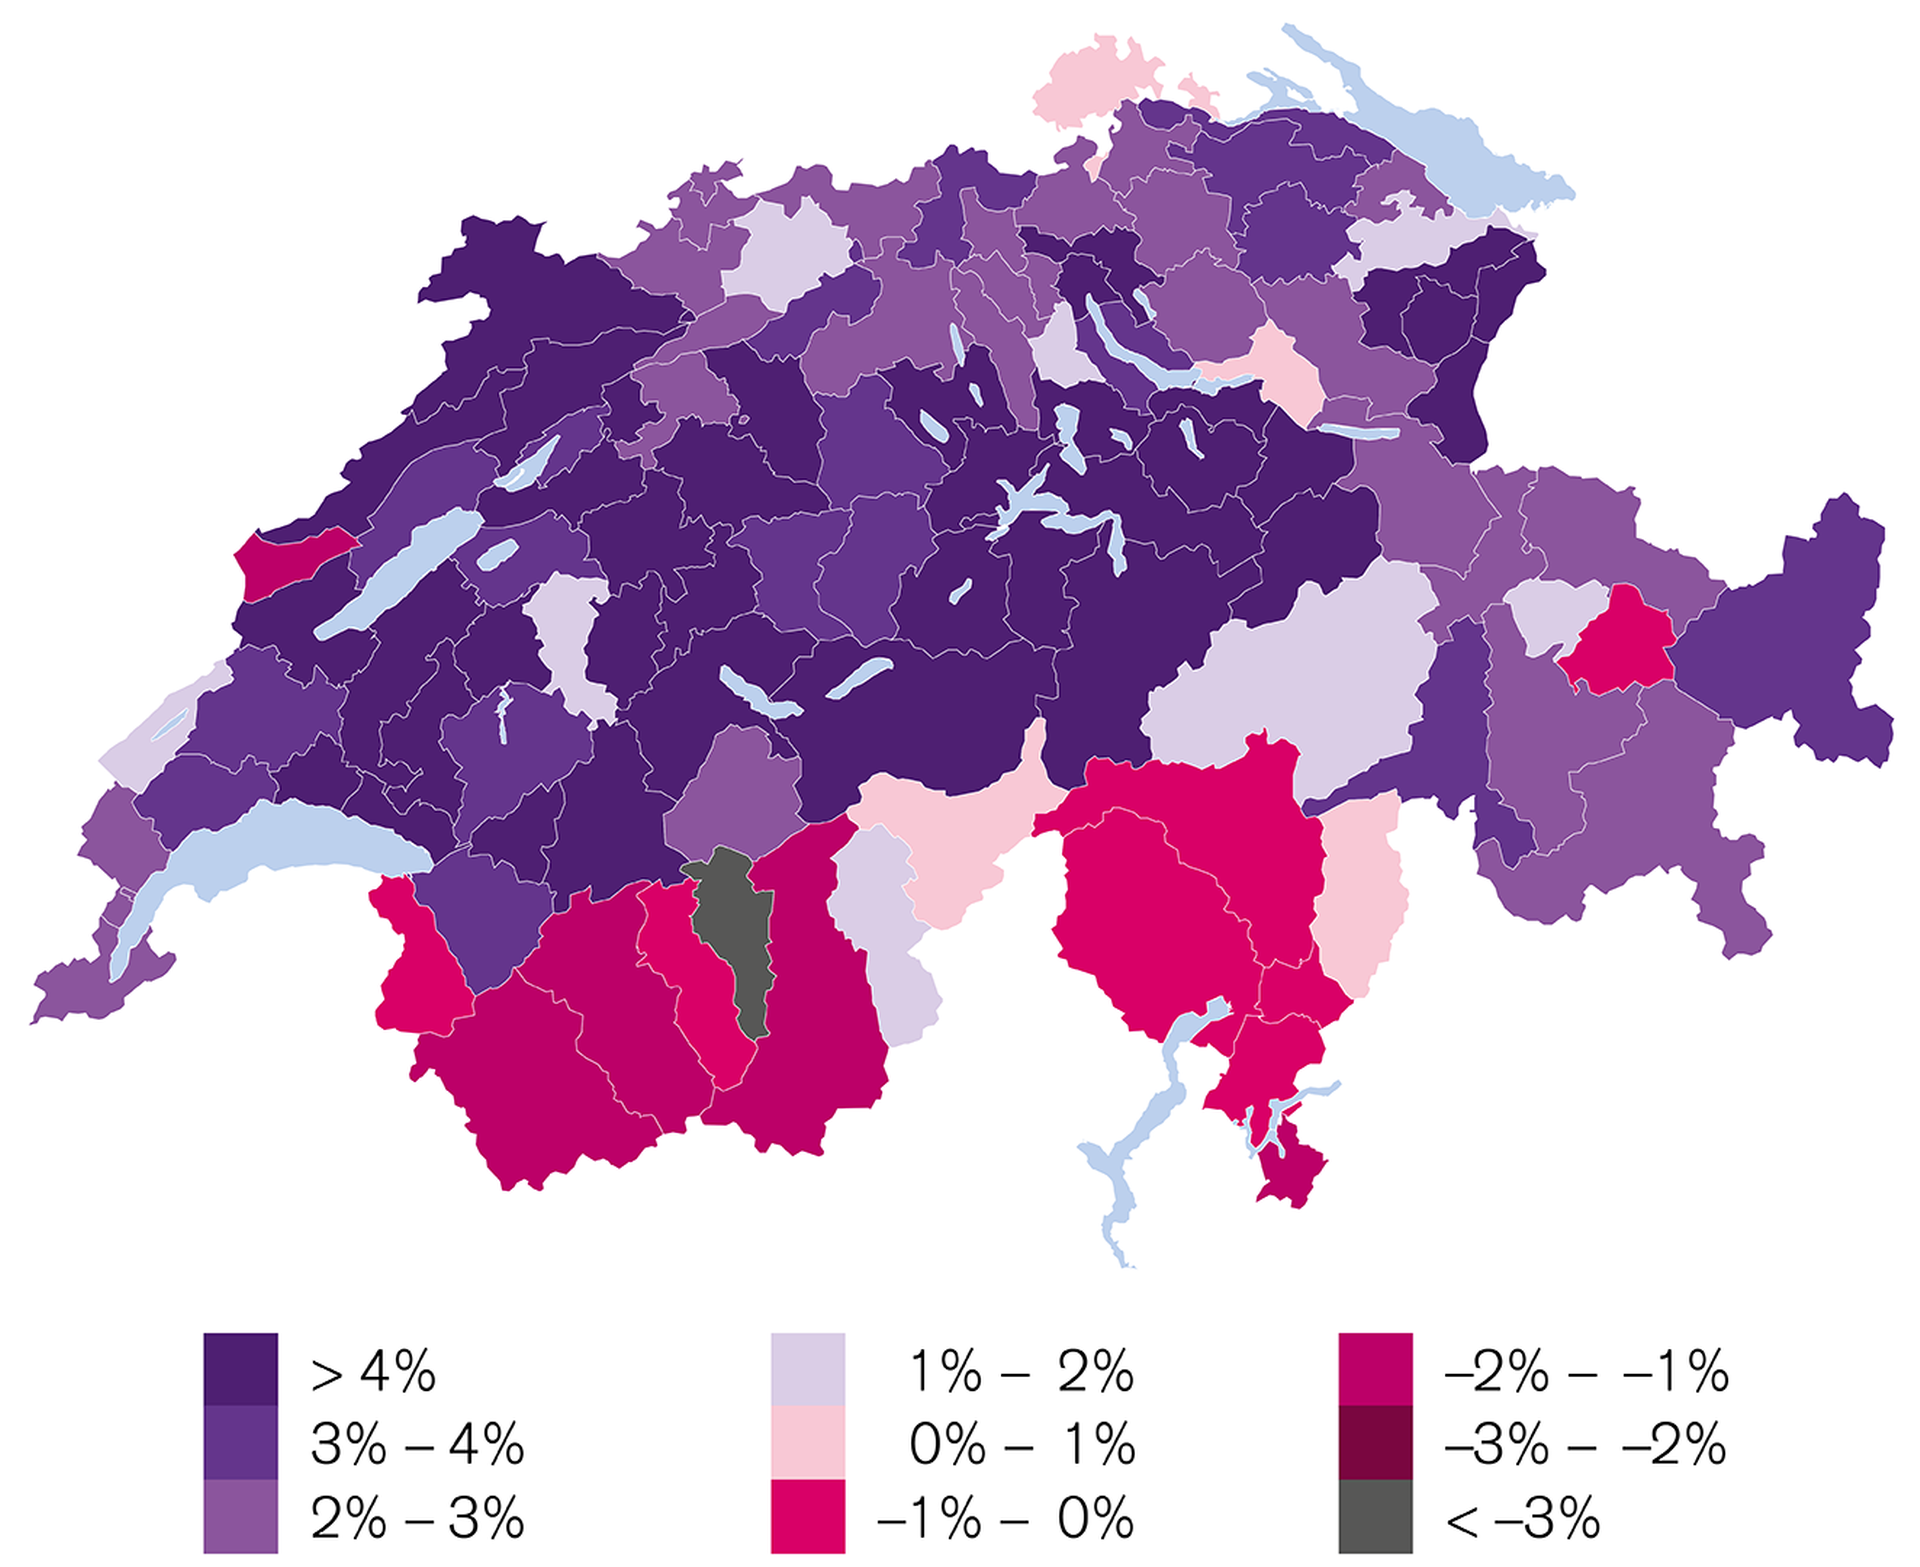 declining-prices-in-residential-real-estate-in-switzerland